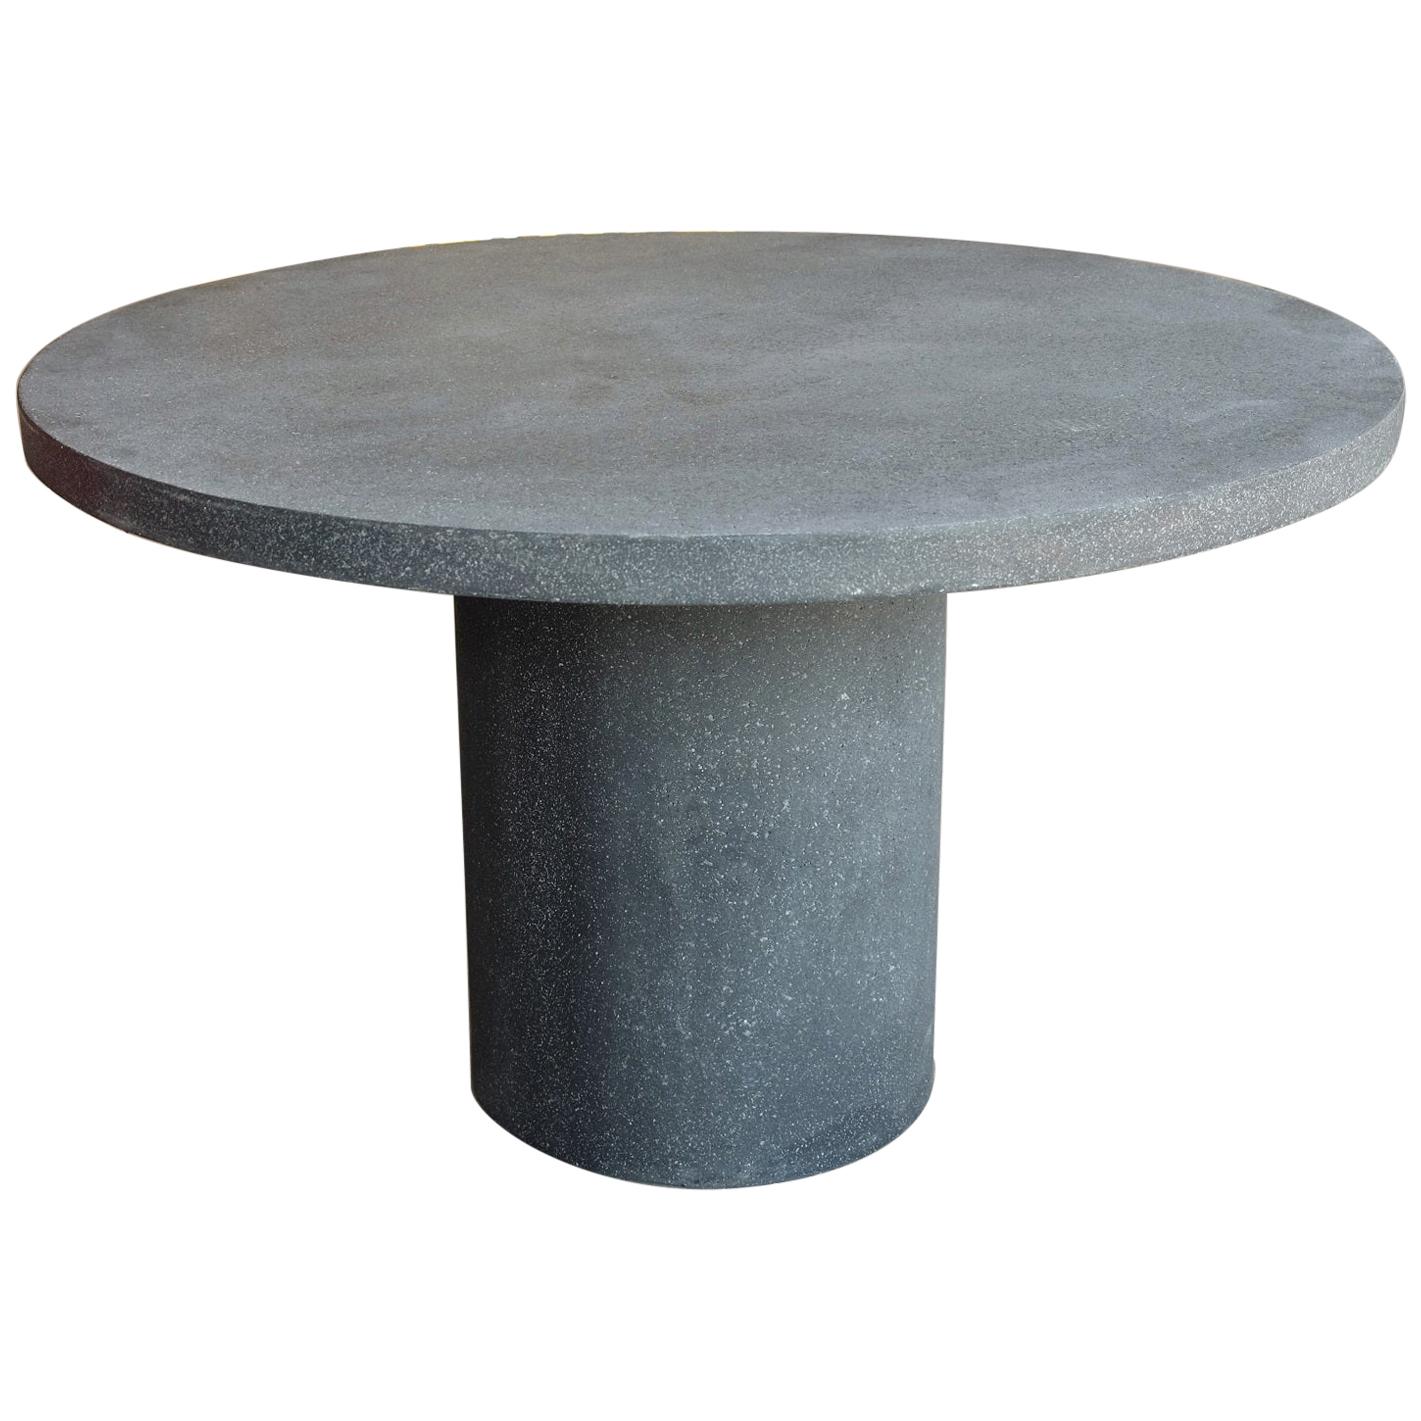 Cast Resin 'Spring' Dining Table, Coal Stone Finish by Zachary A. Design For Sale